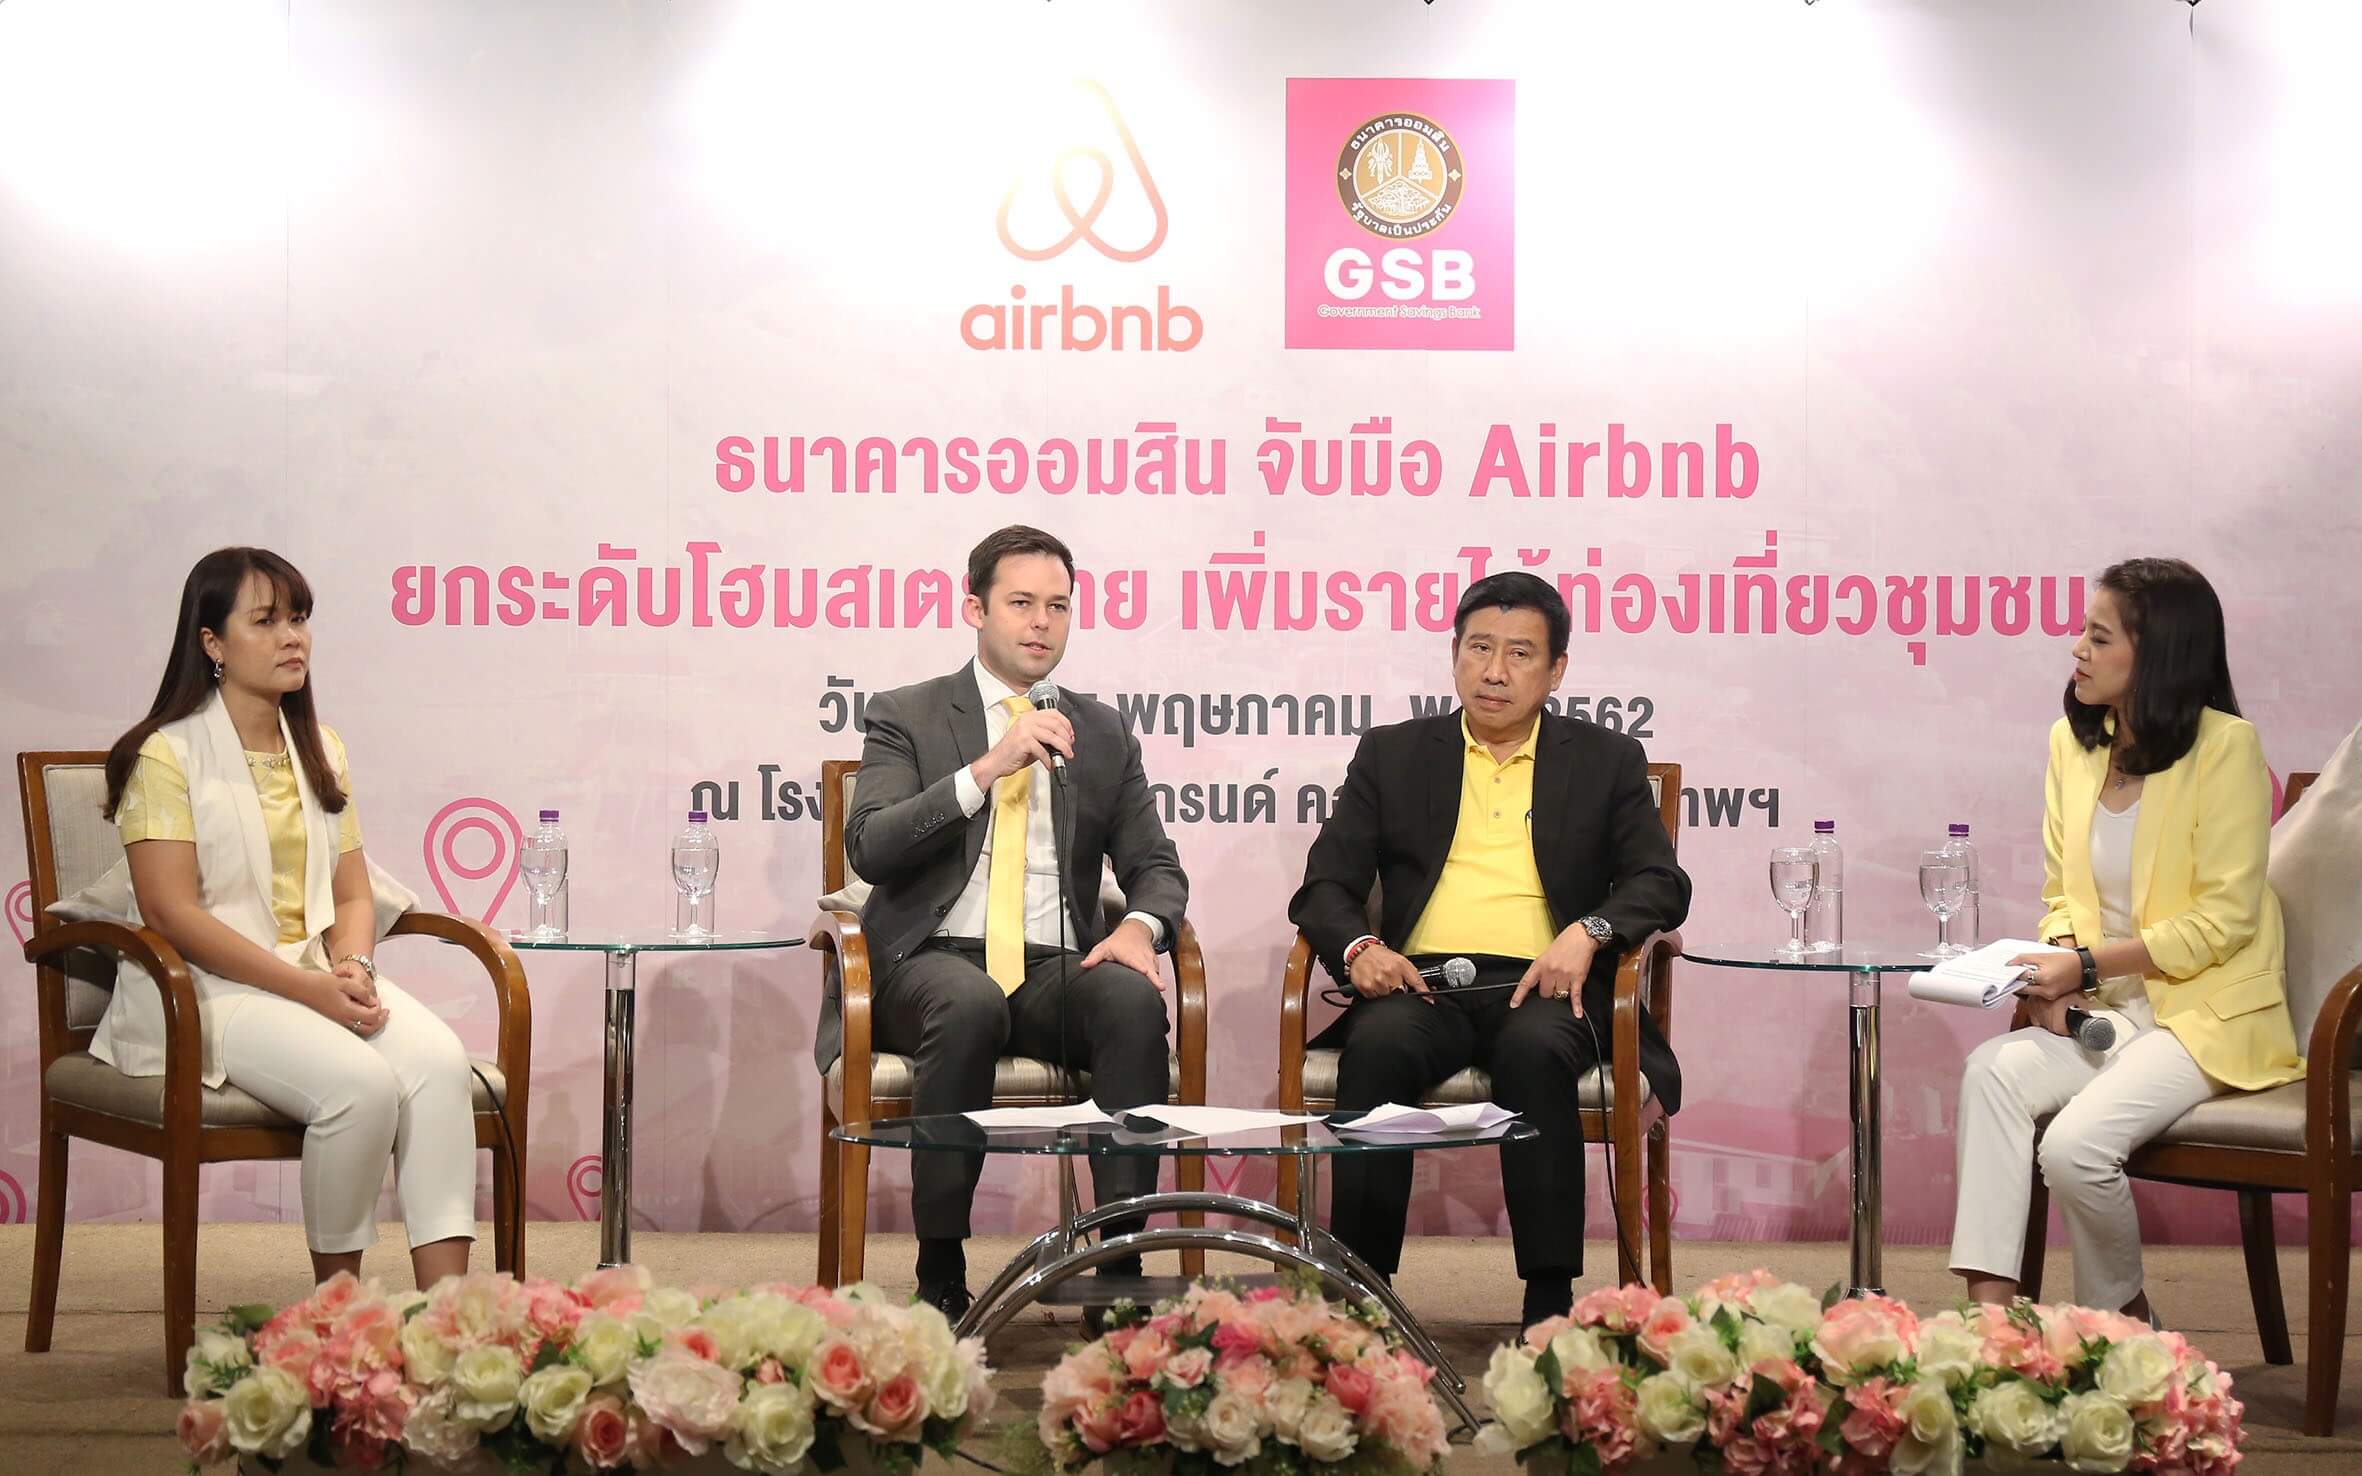 Dr.-Chatchai-Payuhanaveechai-GSB-President-and-CEO-and-Mike-Orgill-Airbnb-General-Manager-for-Southeast-Asia-Hong-Kong-and-Taiwan-conjointement-lance-the-Partnership